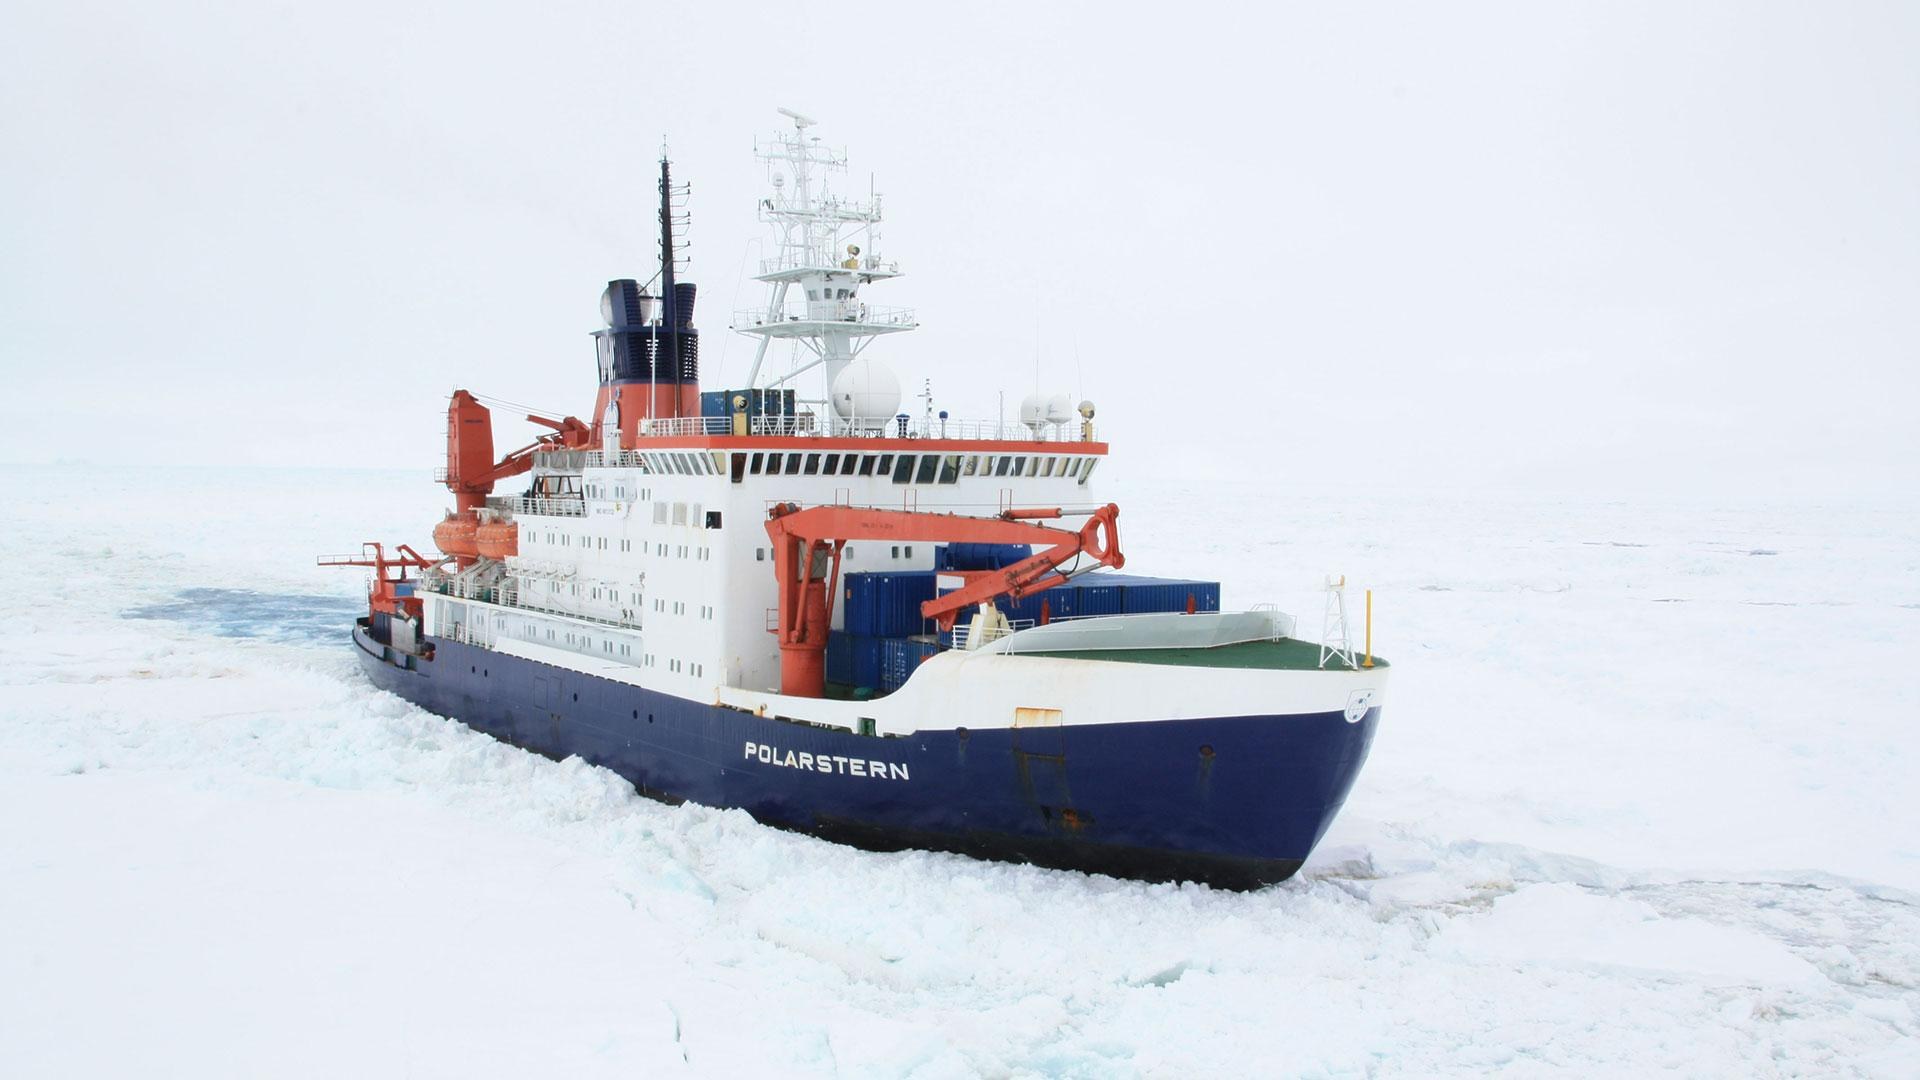 Research vessel Polarstern breaks through the ice